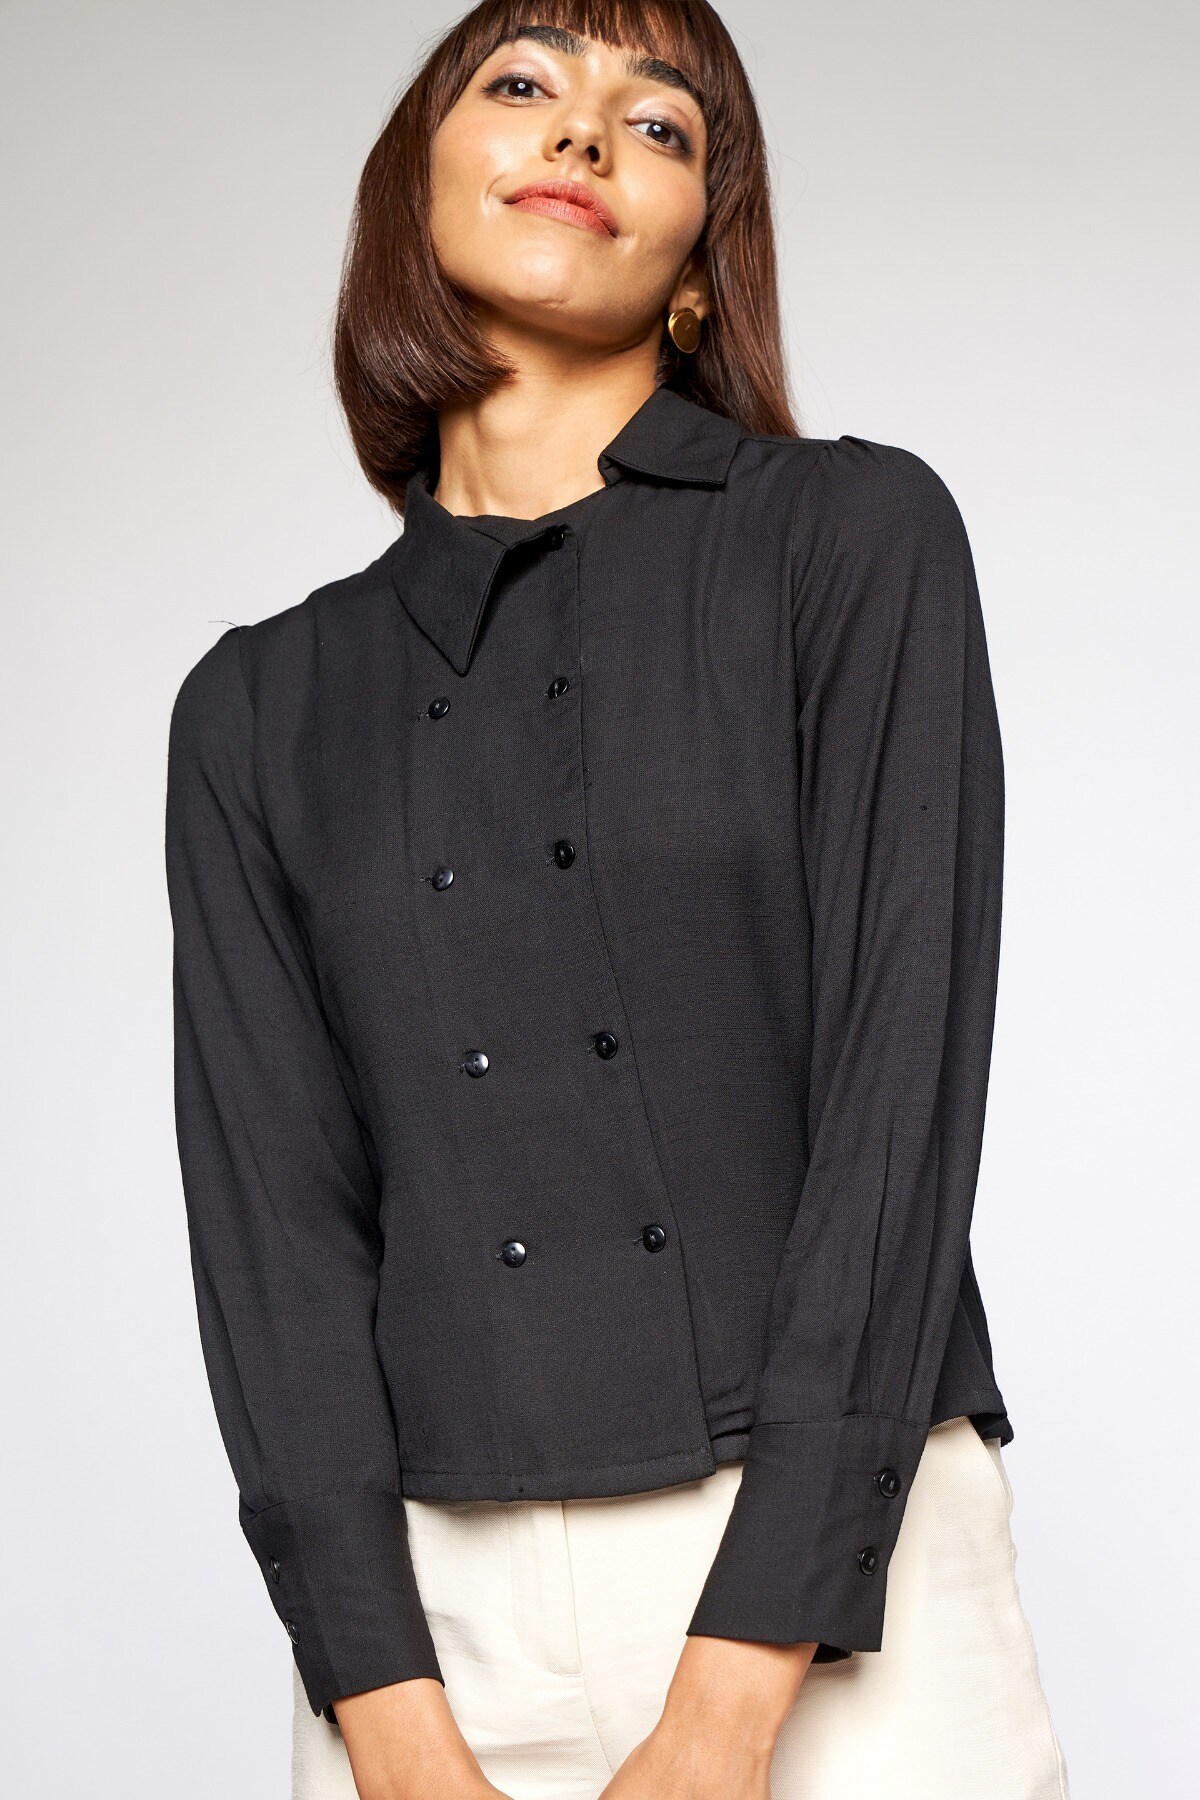 3 - Black Solid Shirt Style Top, image 3